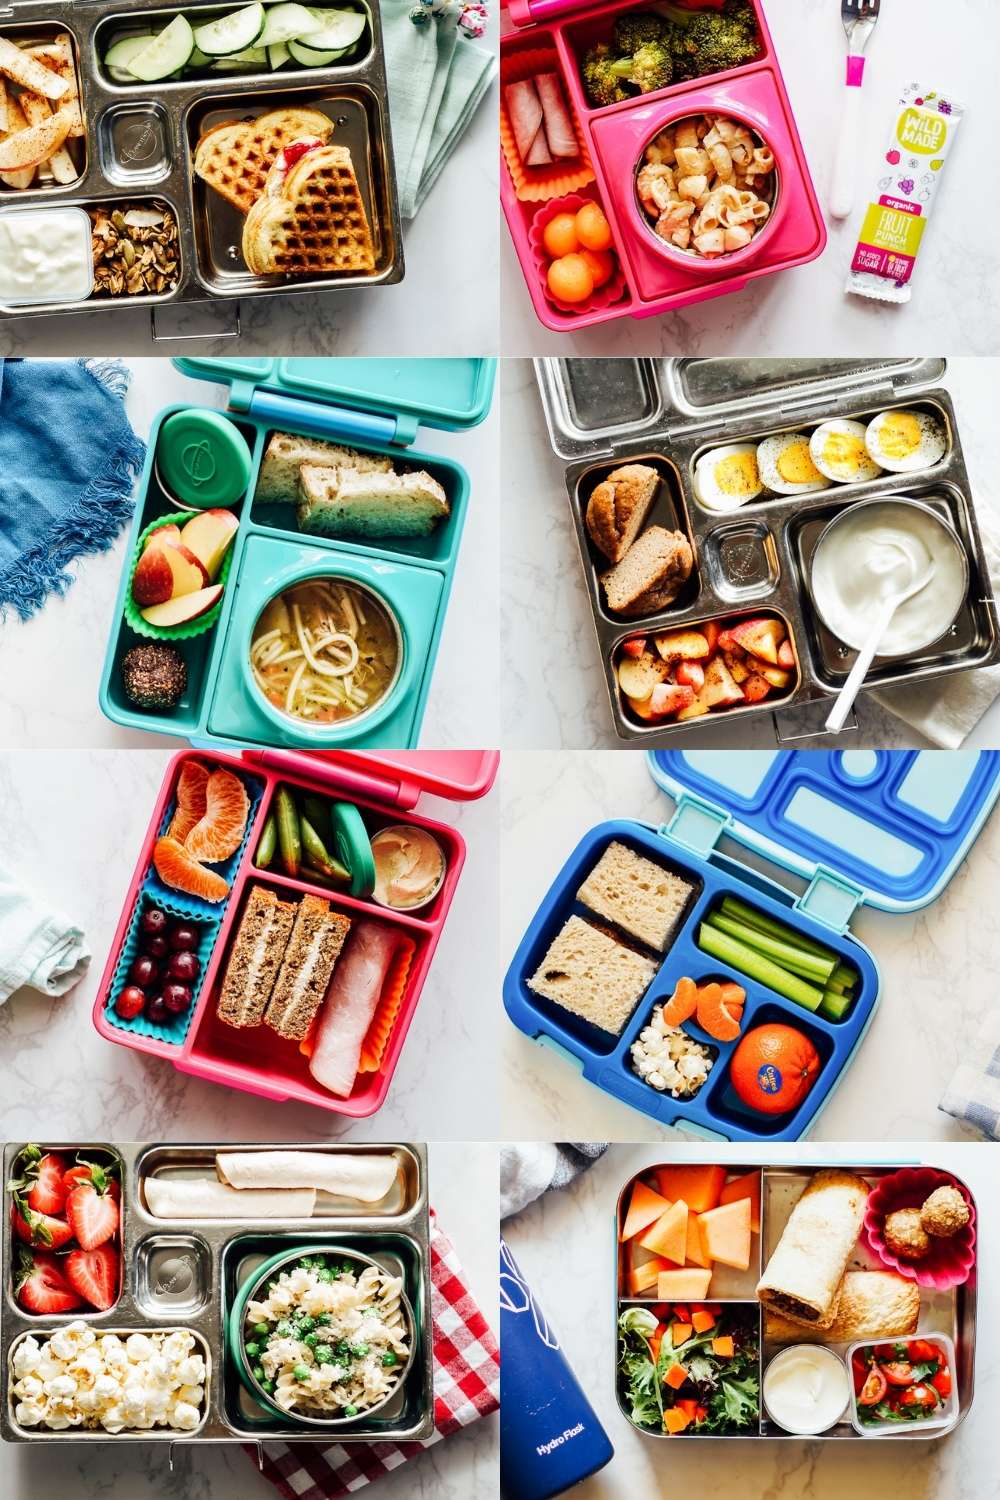 27 Bento Box Ideas For Kids & School Lunch (Easy to Make)